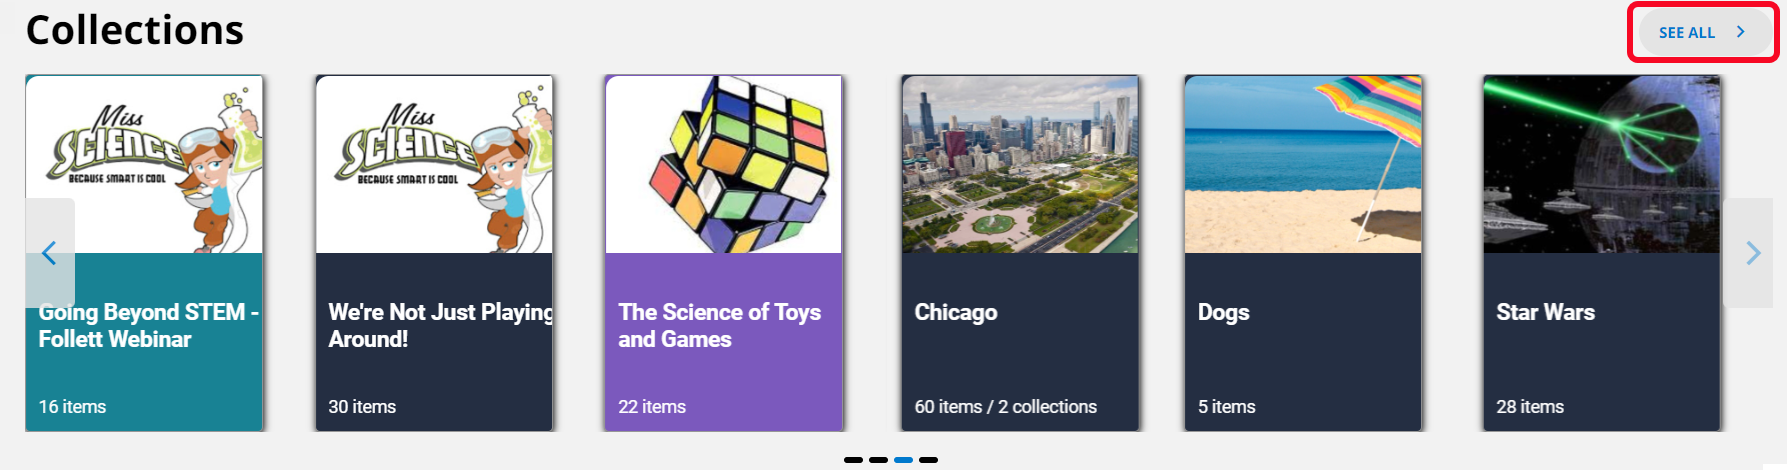 Collections ribbon on the Destiny Discover homepage.